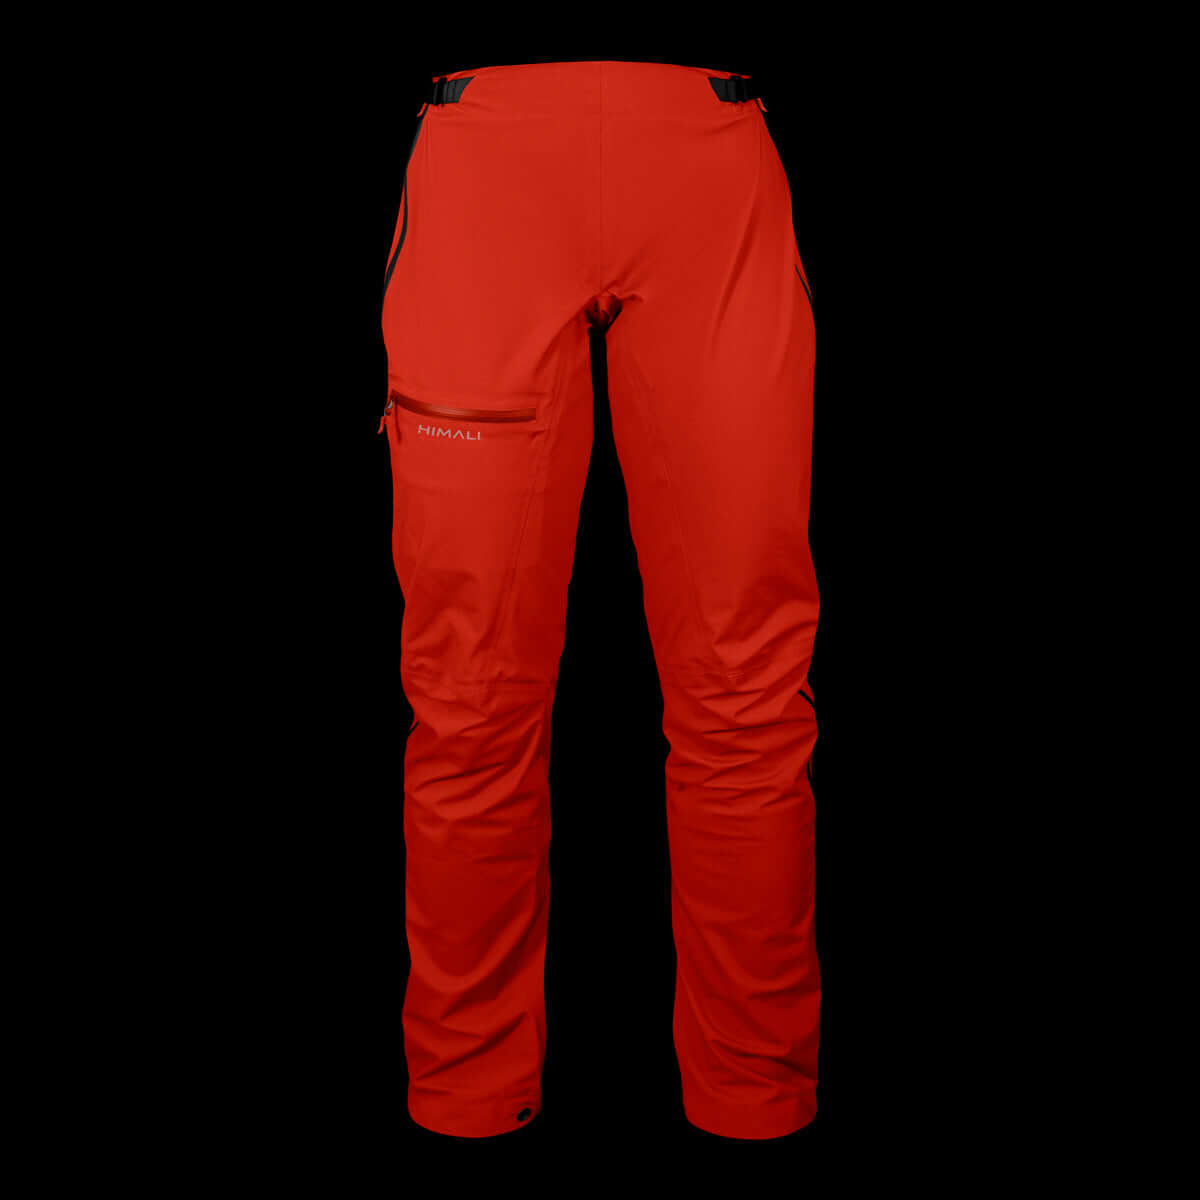 A product photo of the Women's Monsoon Hardshell 4-Season Waterproof pants in the color Lava Red made of a 20K/20K Waterproof Breathable Membrane